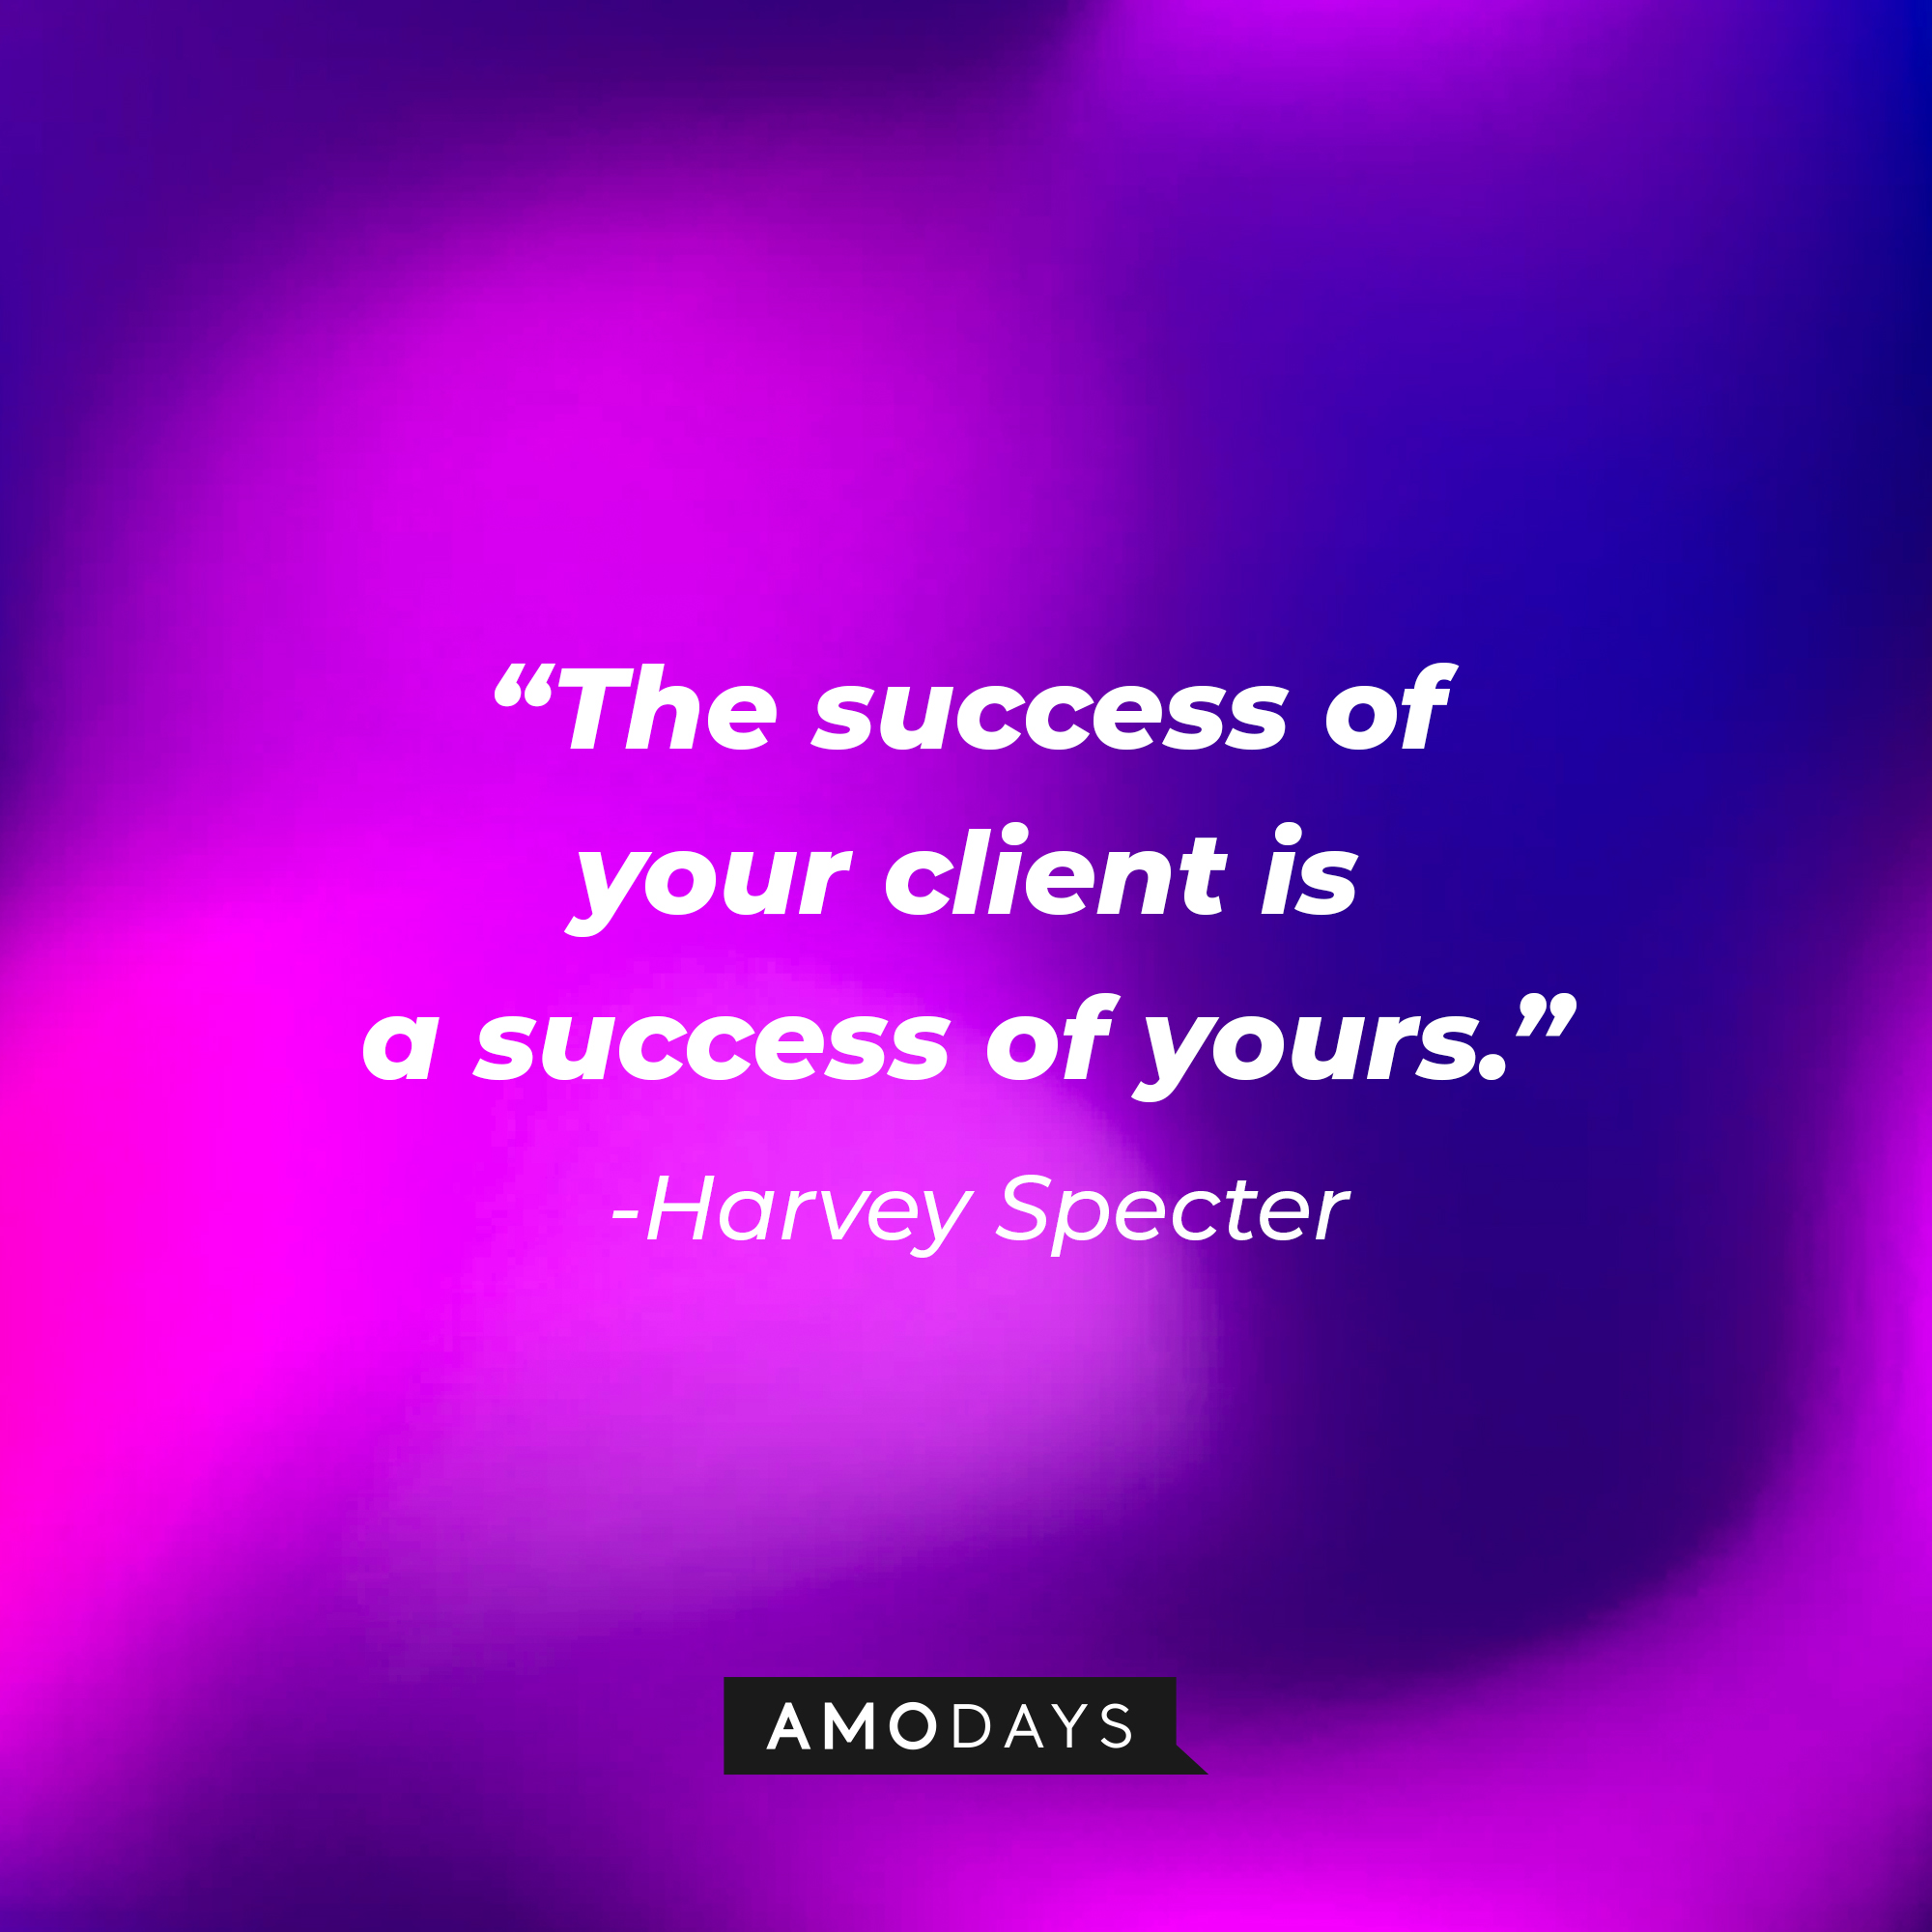 Harvey Specter's quote: "The success of your client is a success of yours." | Source: Amodays